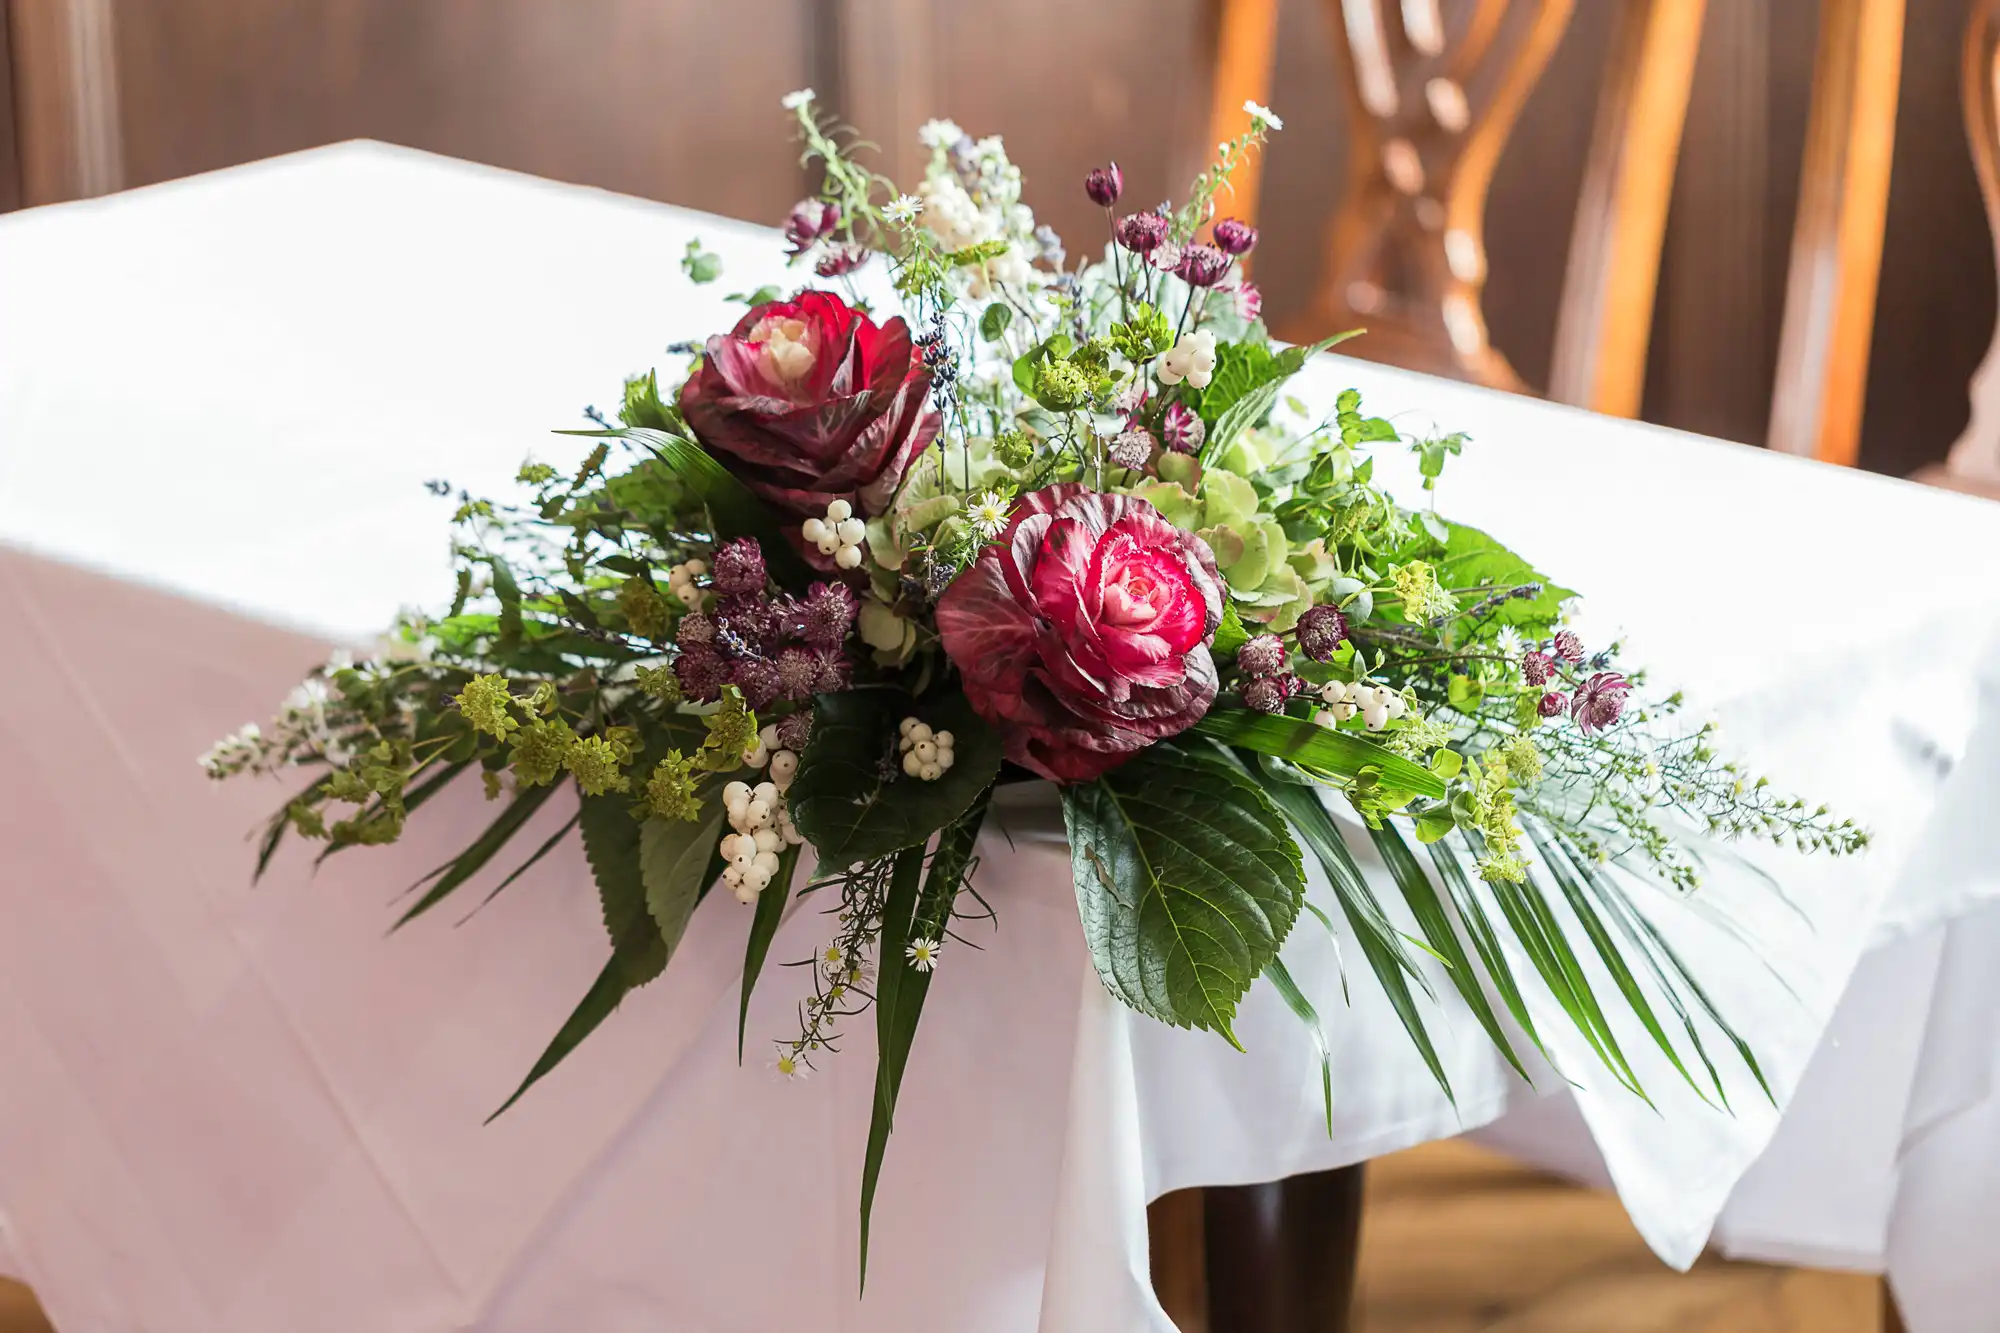 Elegant floral centerpiece with deep red roses and assorted greenery on a white draped table, in a warmly lit indoor setting.